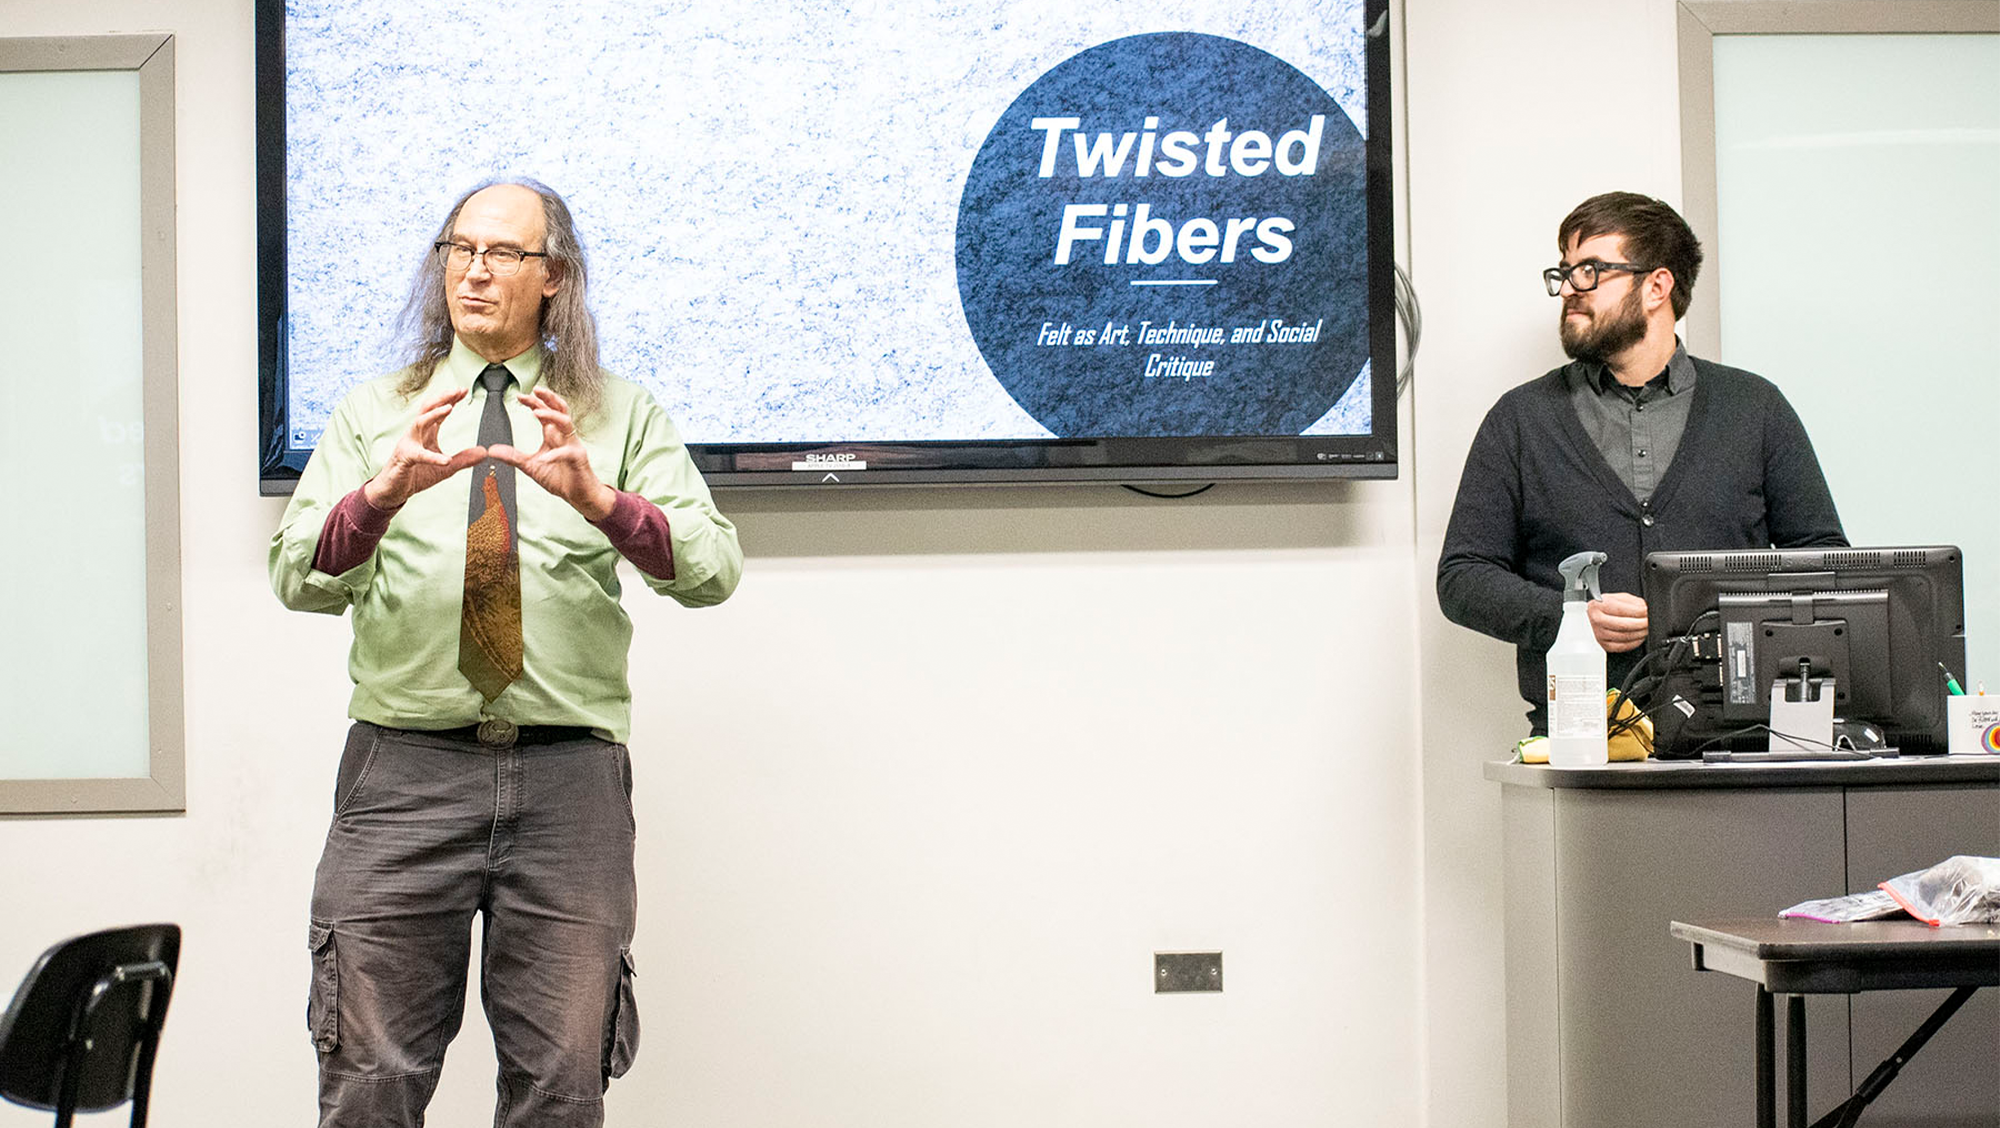 A speaker presents his lecture, titled Twisted Fibers, about felt as art.